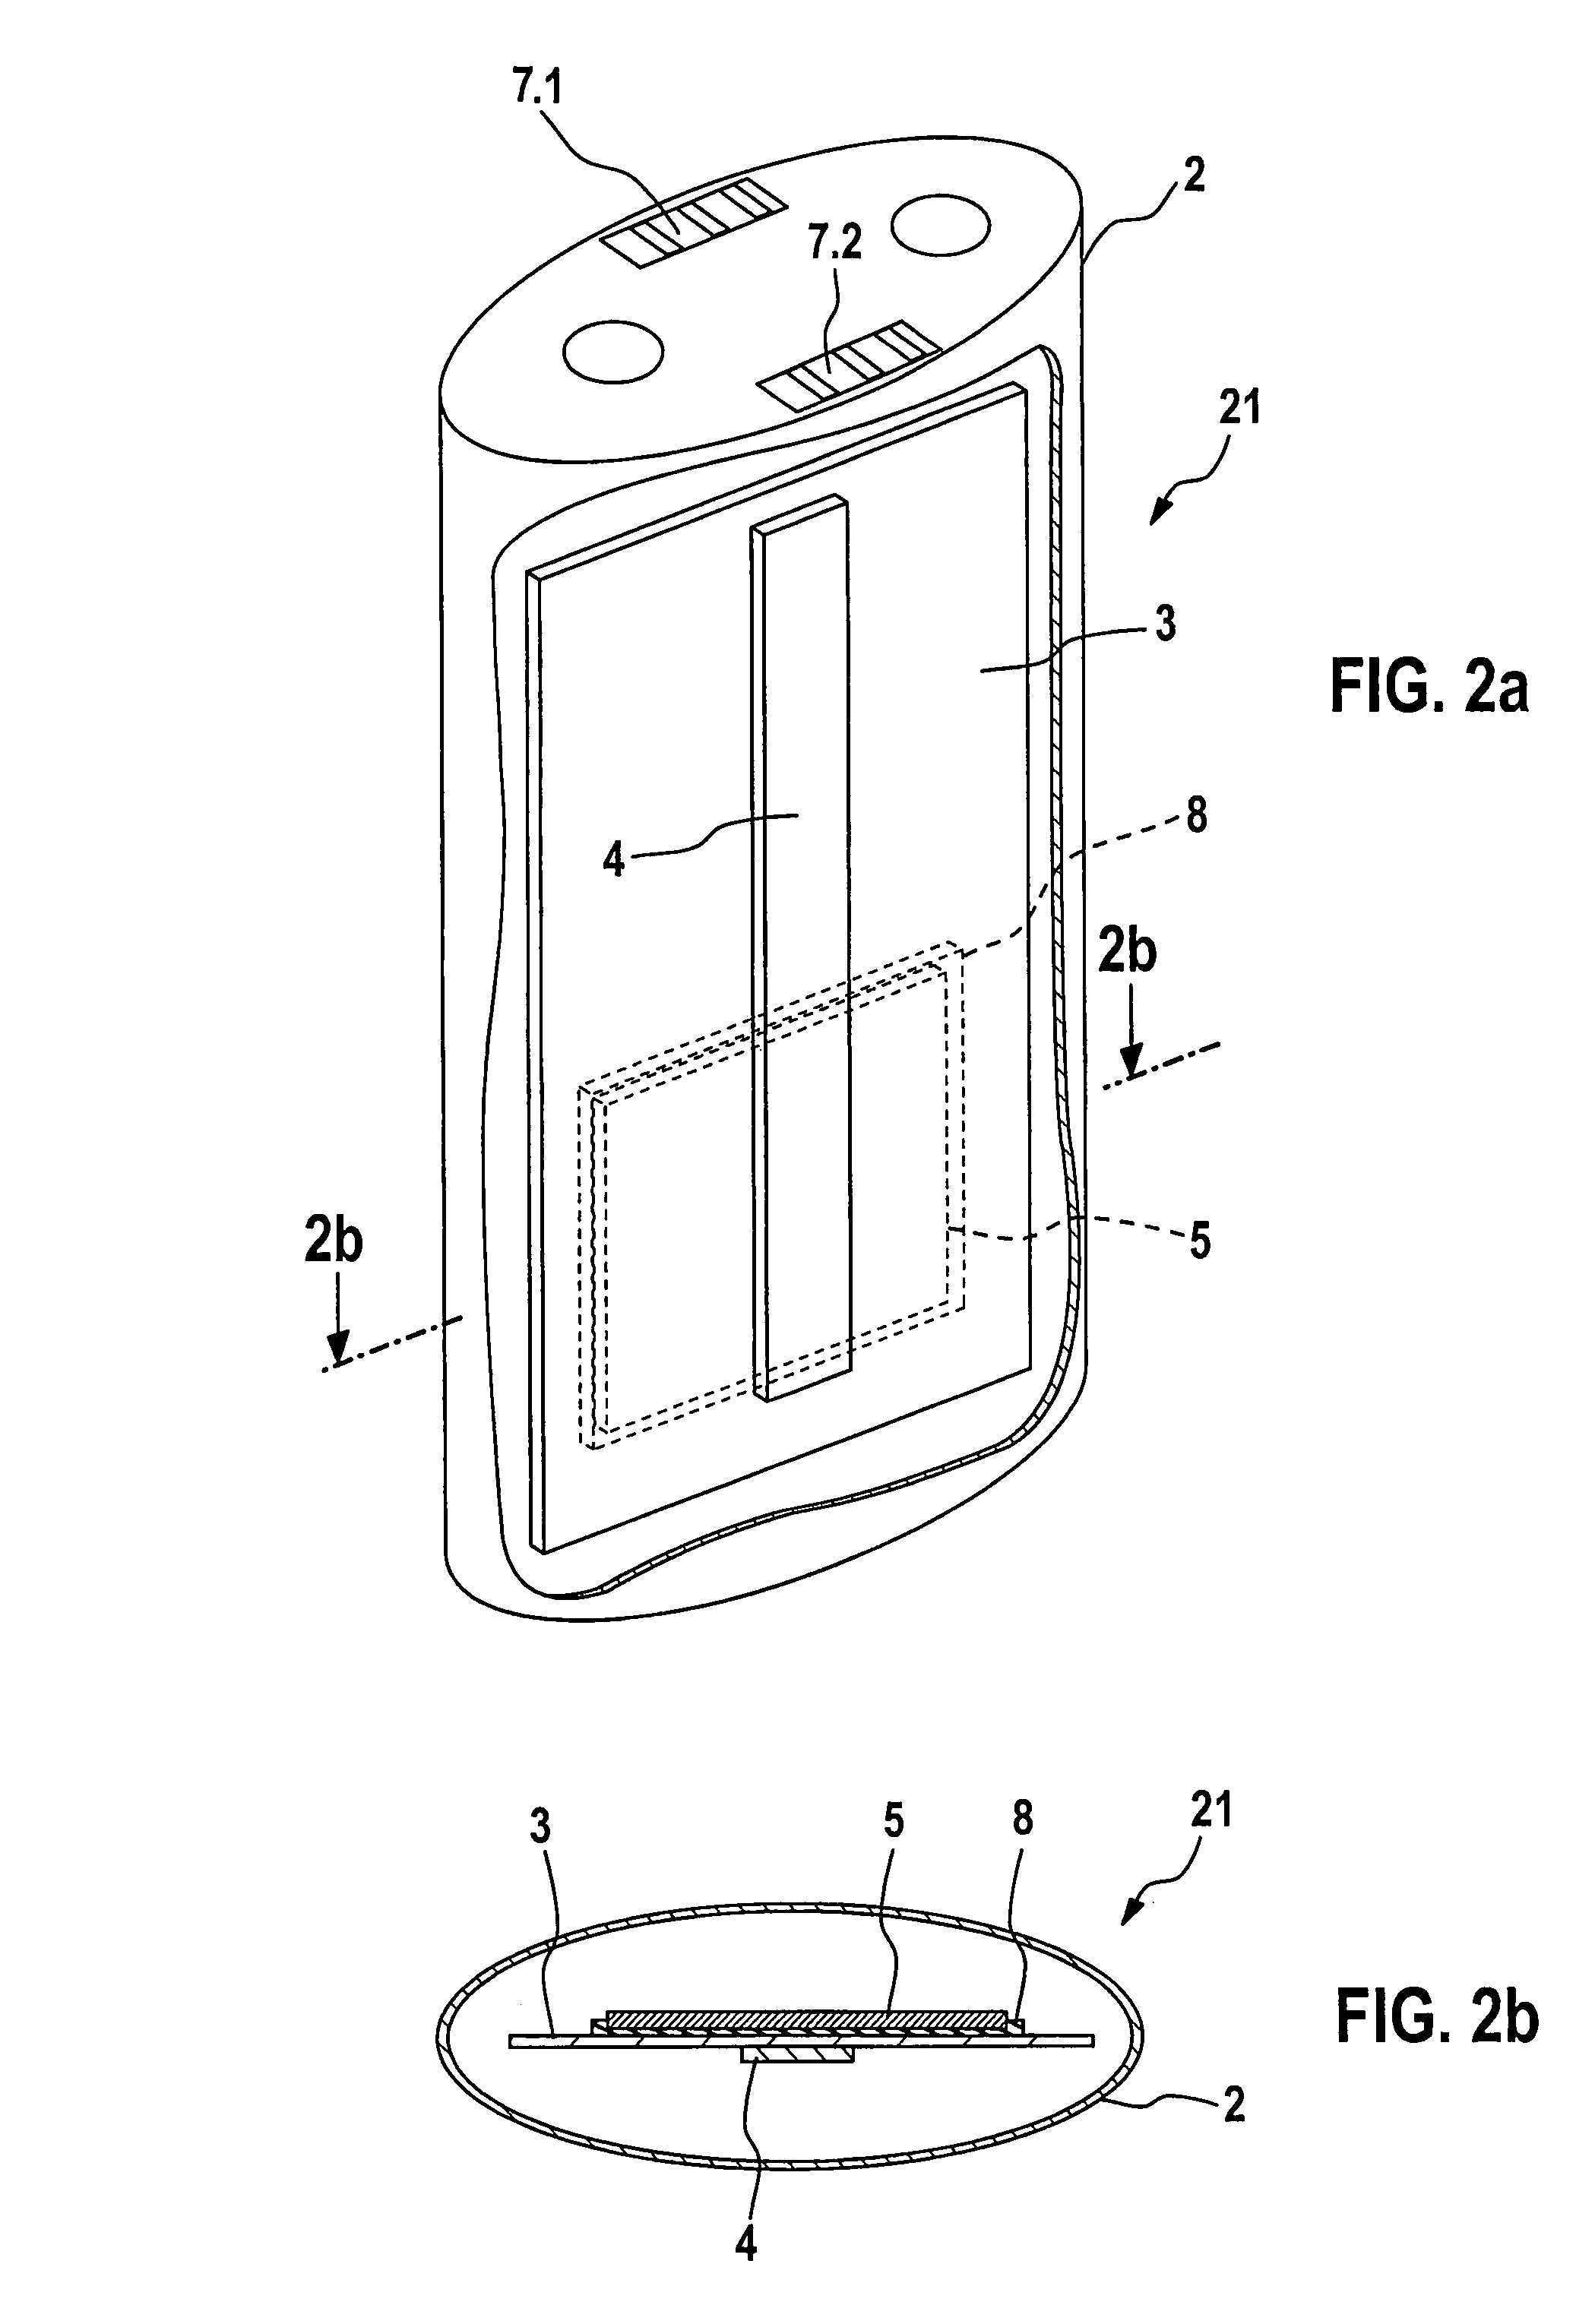 X-ray sensitive camera comprising two image receivers and X-ray device